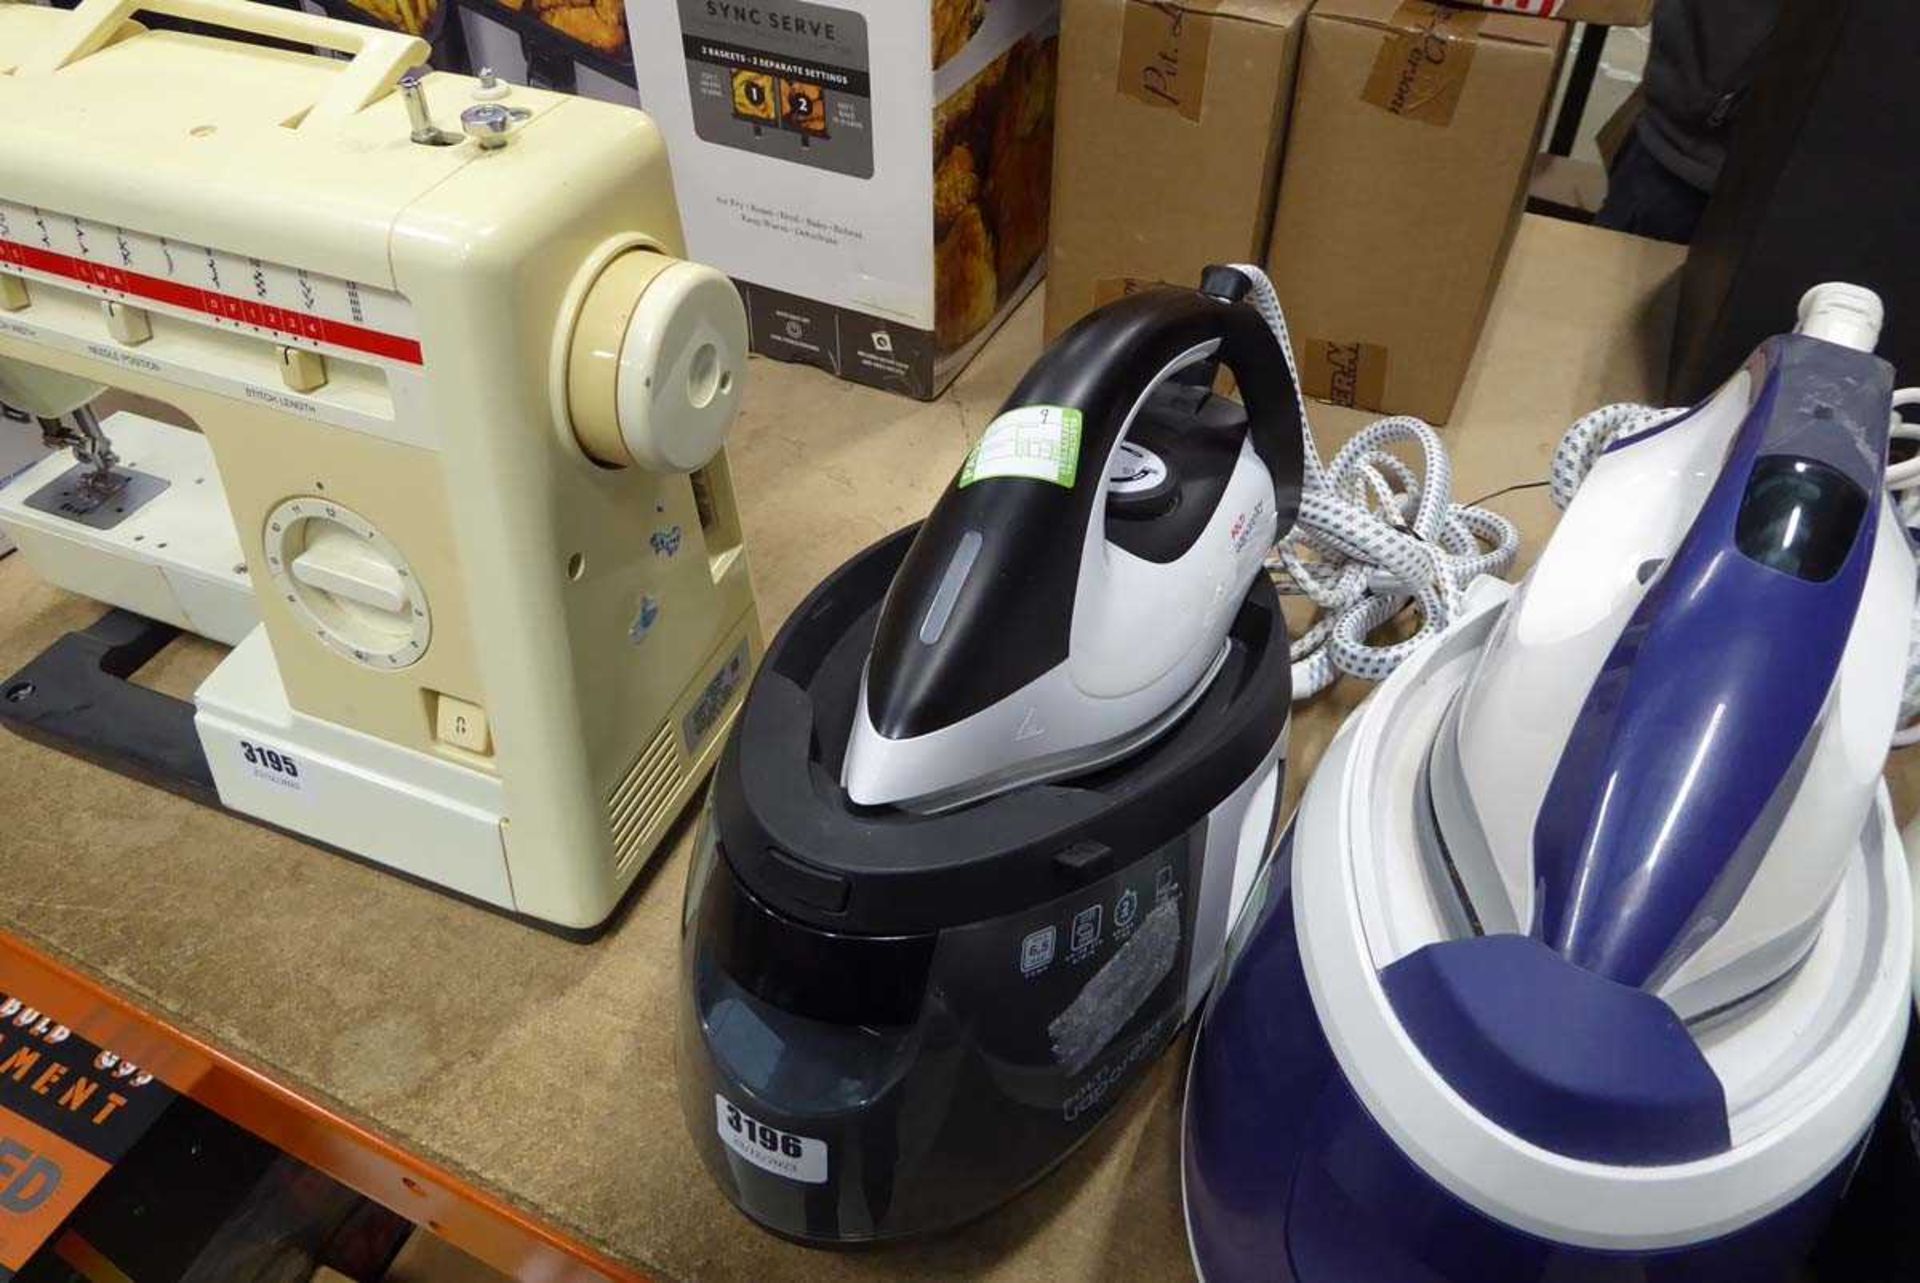 Unboxed Polti steam iron